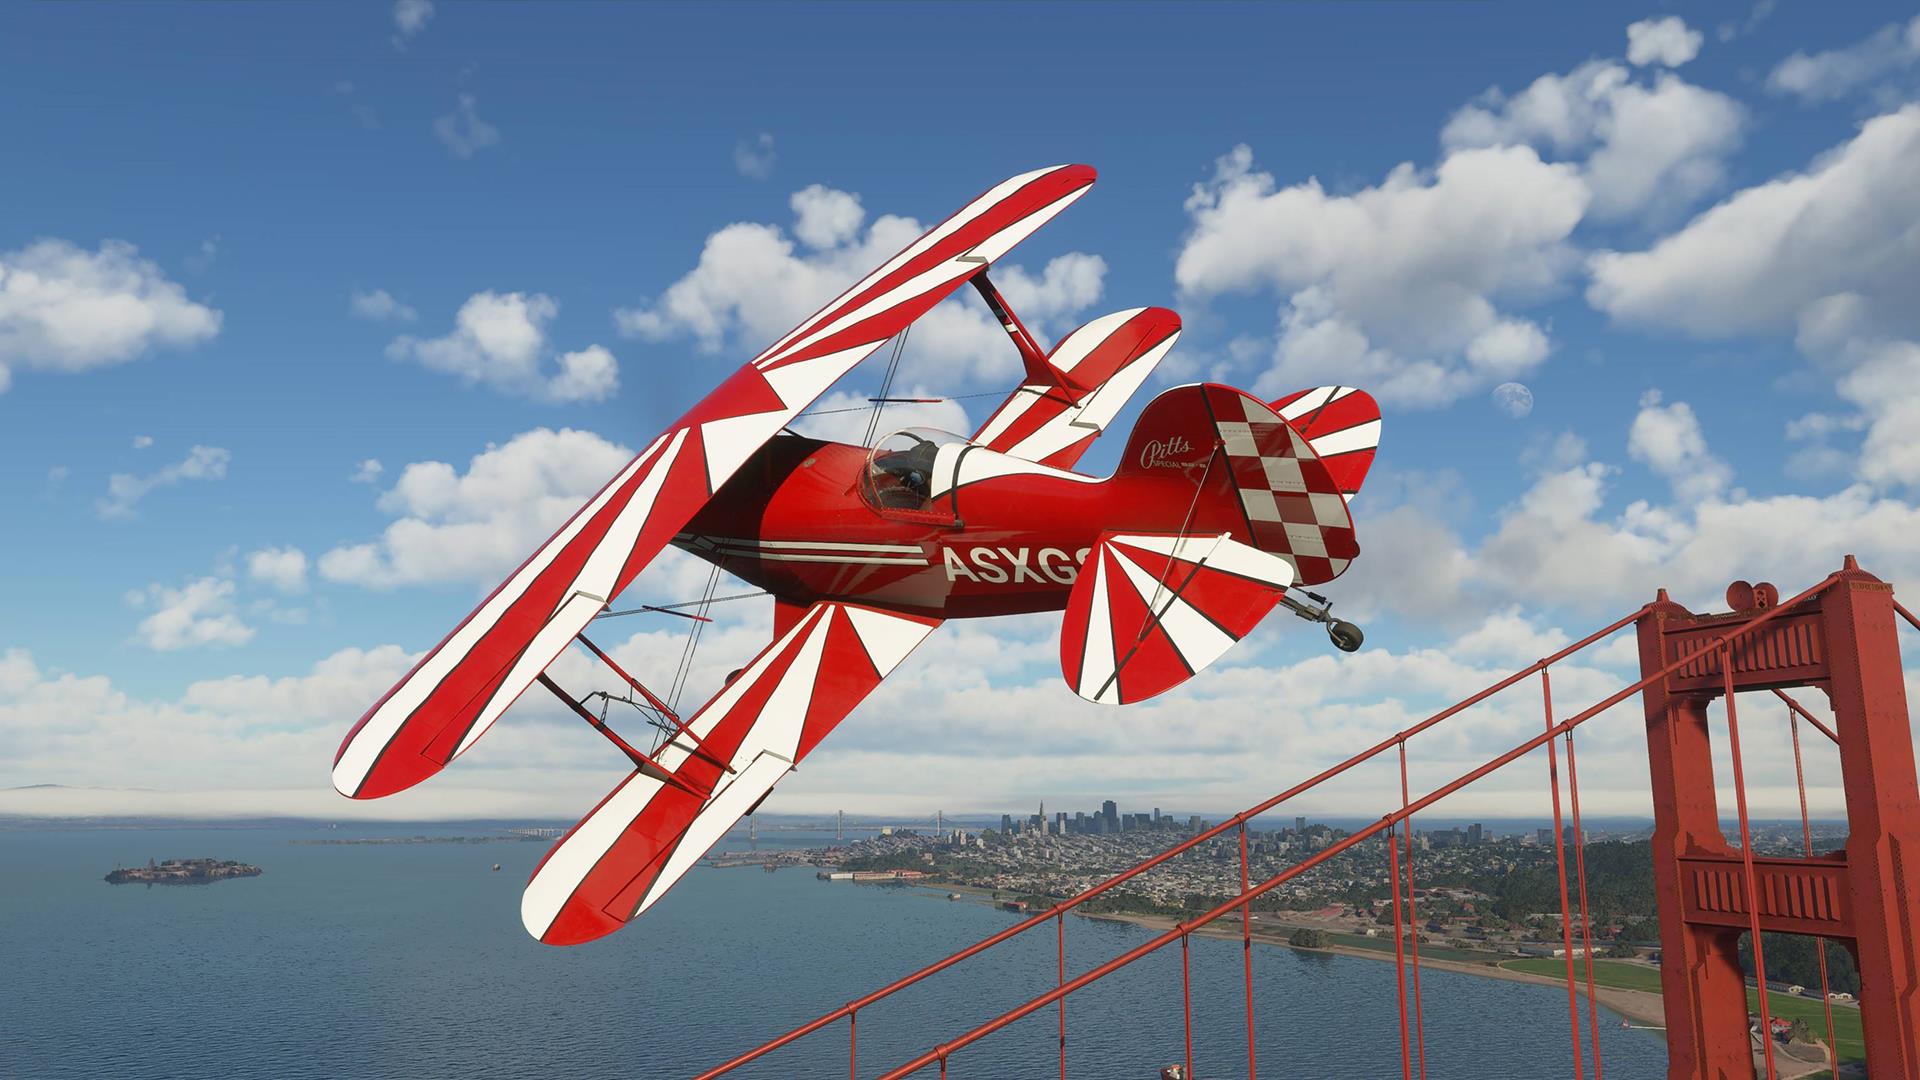 Image for Microsoft Flight Simulator will feature a built-in Marketplace for selling mods